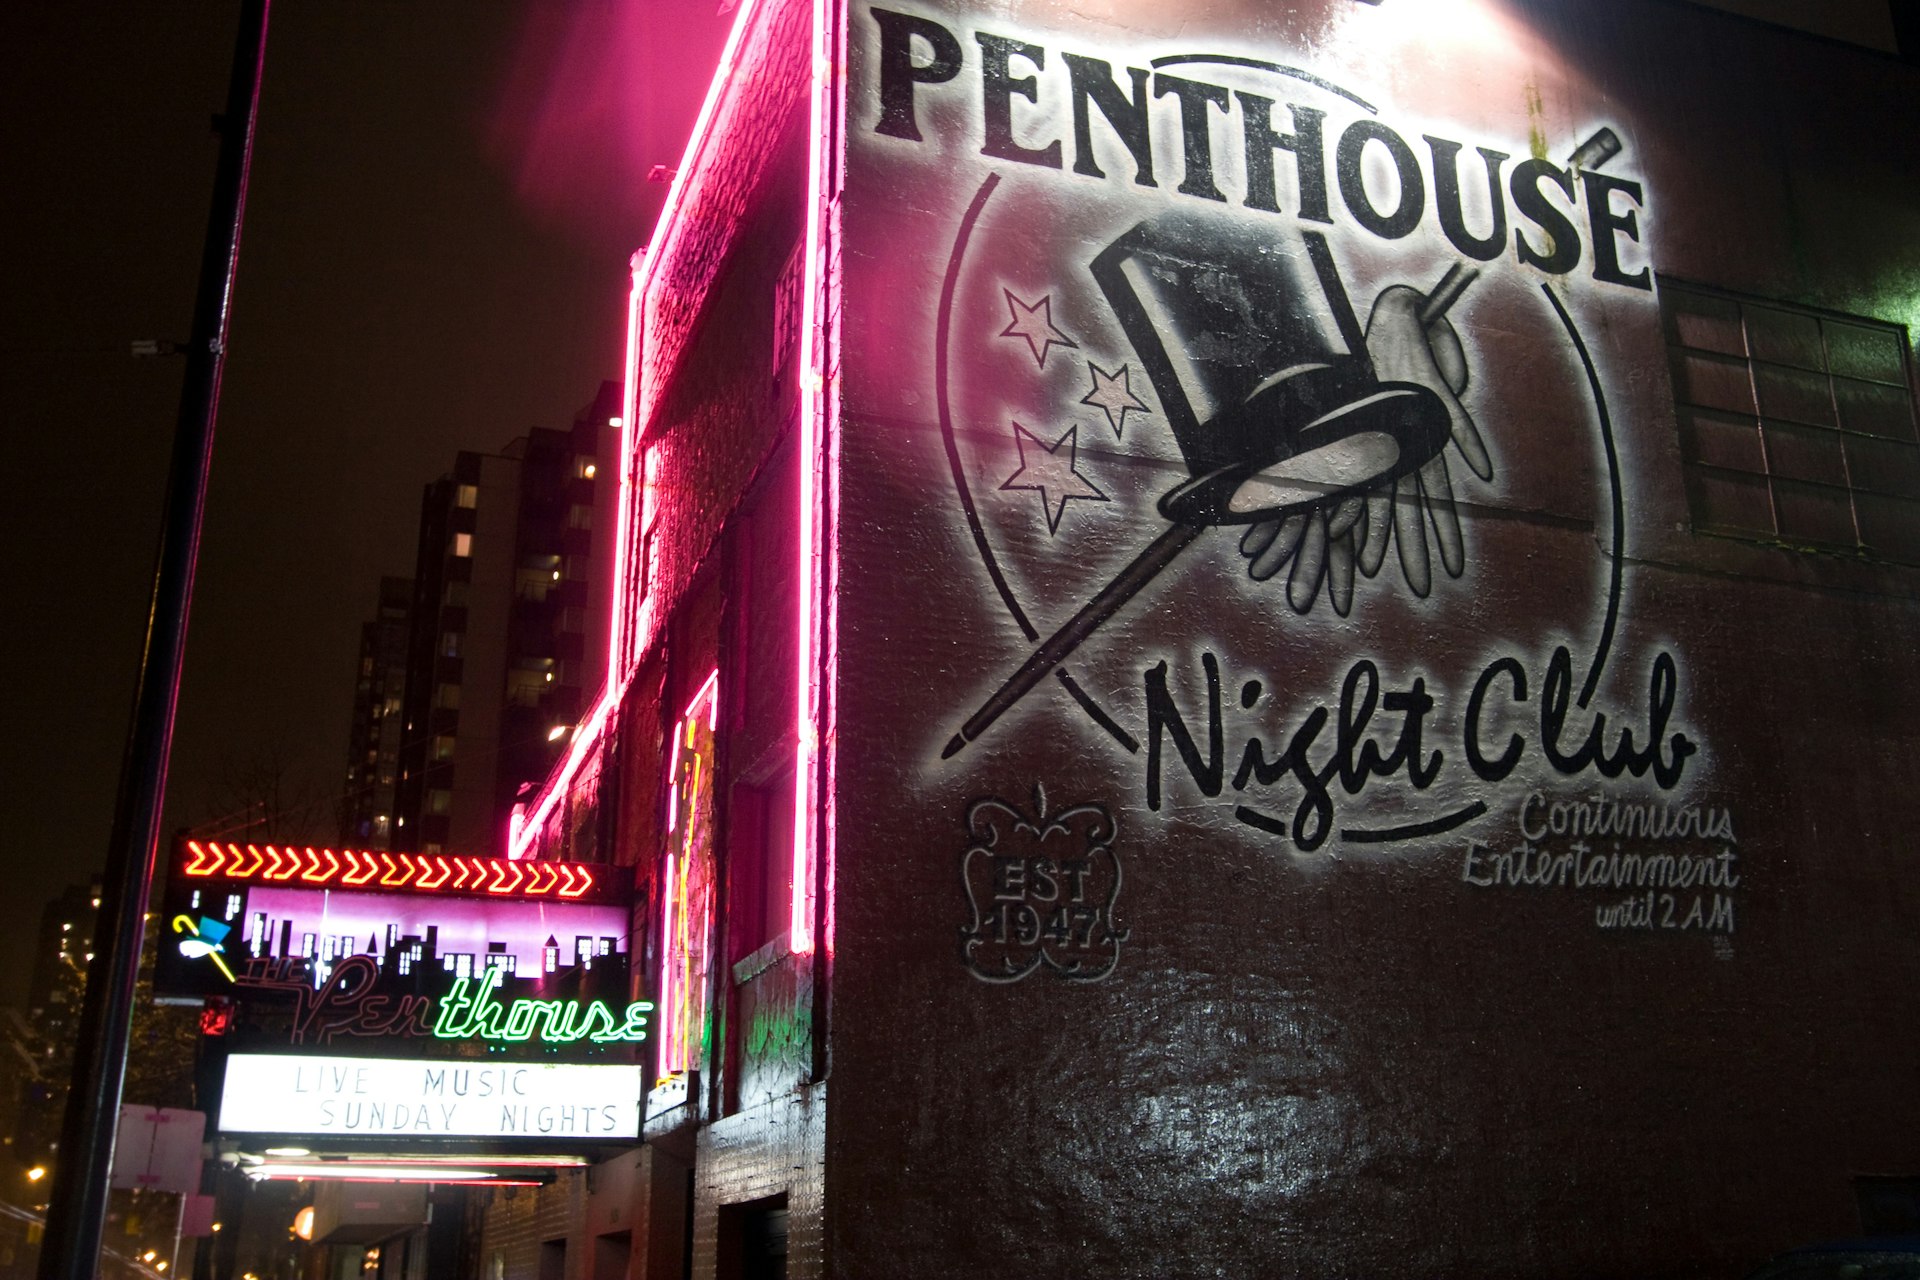 The Penthouse was one of the first Vancouver clubs to embrace African American entertainers – Sammy Davis Jr, Nat King Cole, and Duke Ellington all played here. Image by Lawrence Worcester / Getty